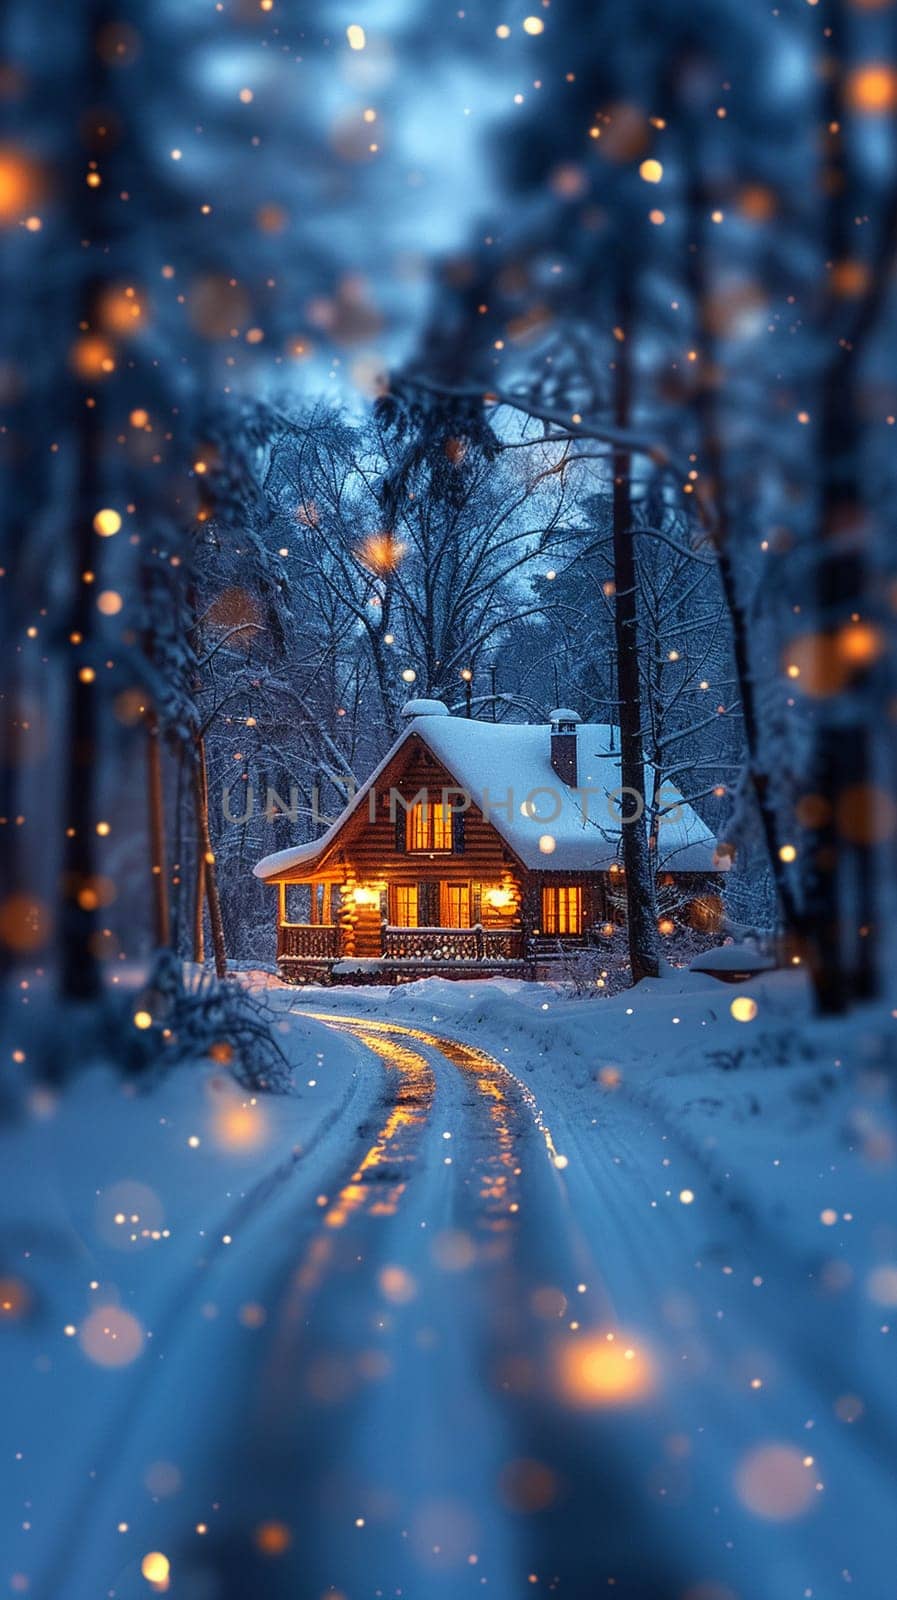 Cozy Winter Cabin with Blurred Snowflakes and Warm Lights, The soft glow and falling snow create an atmosphere of winter comfort and retreat.